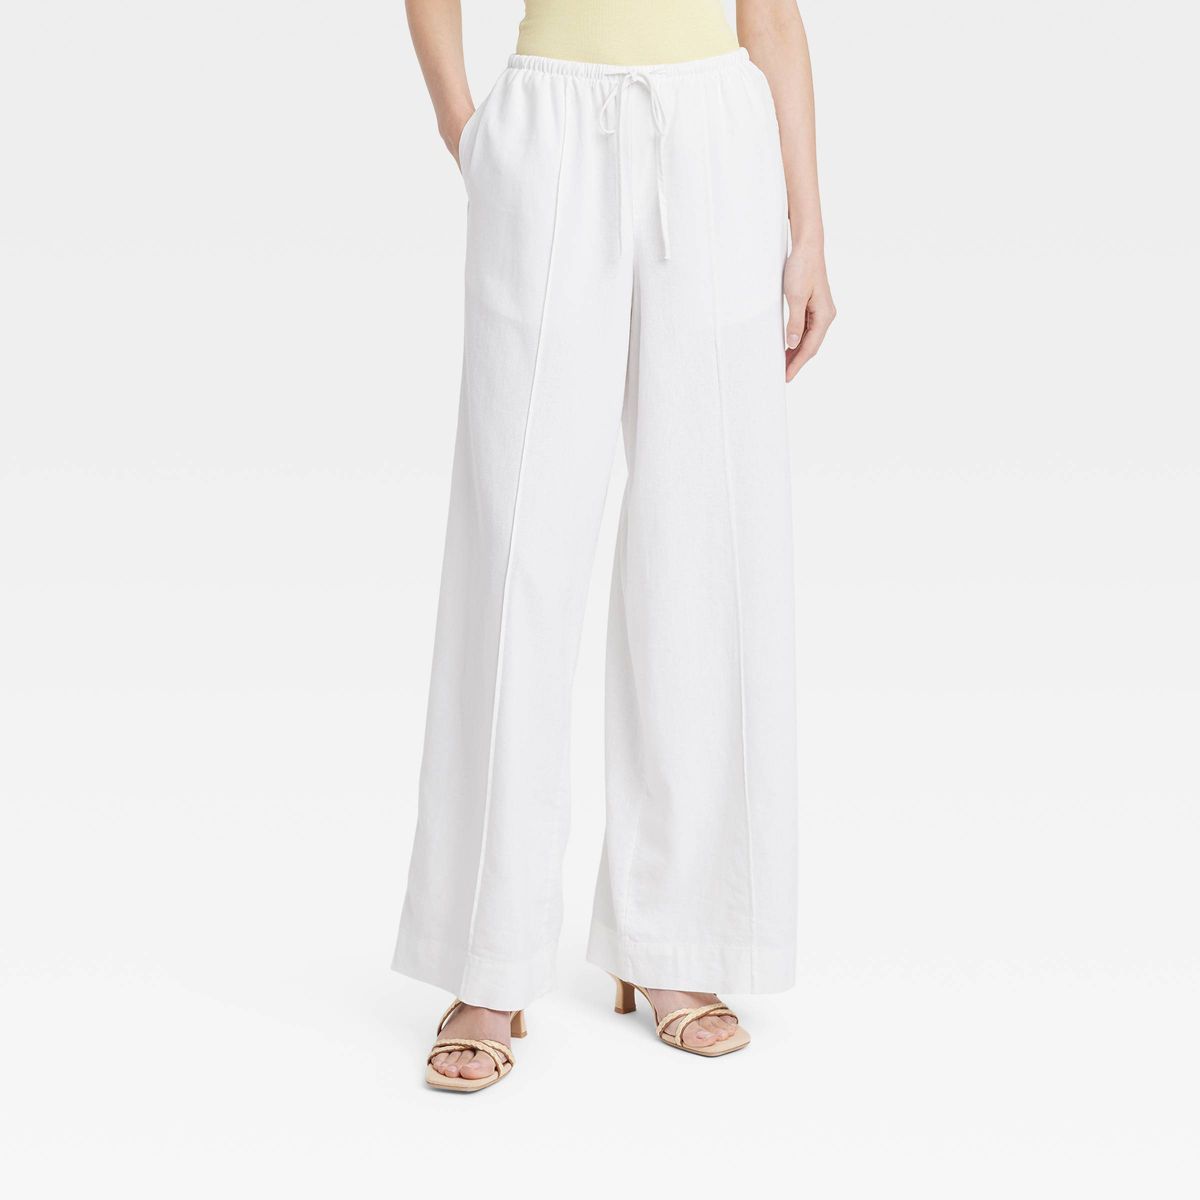 Women's High-Rise Wide Leg Linen Pull-On Pants - A New Day™ White S | Target